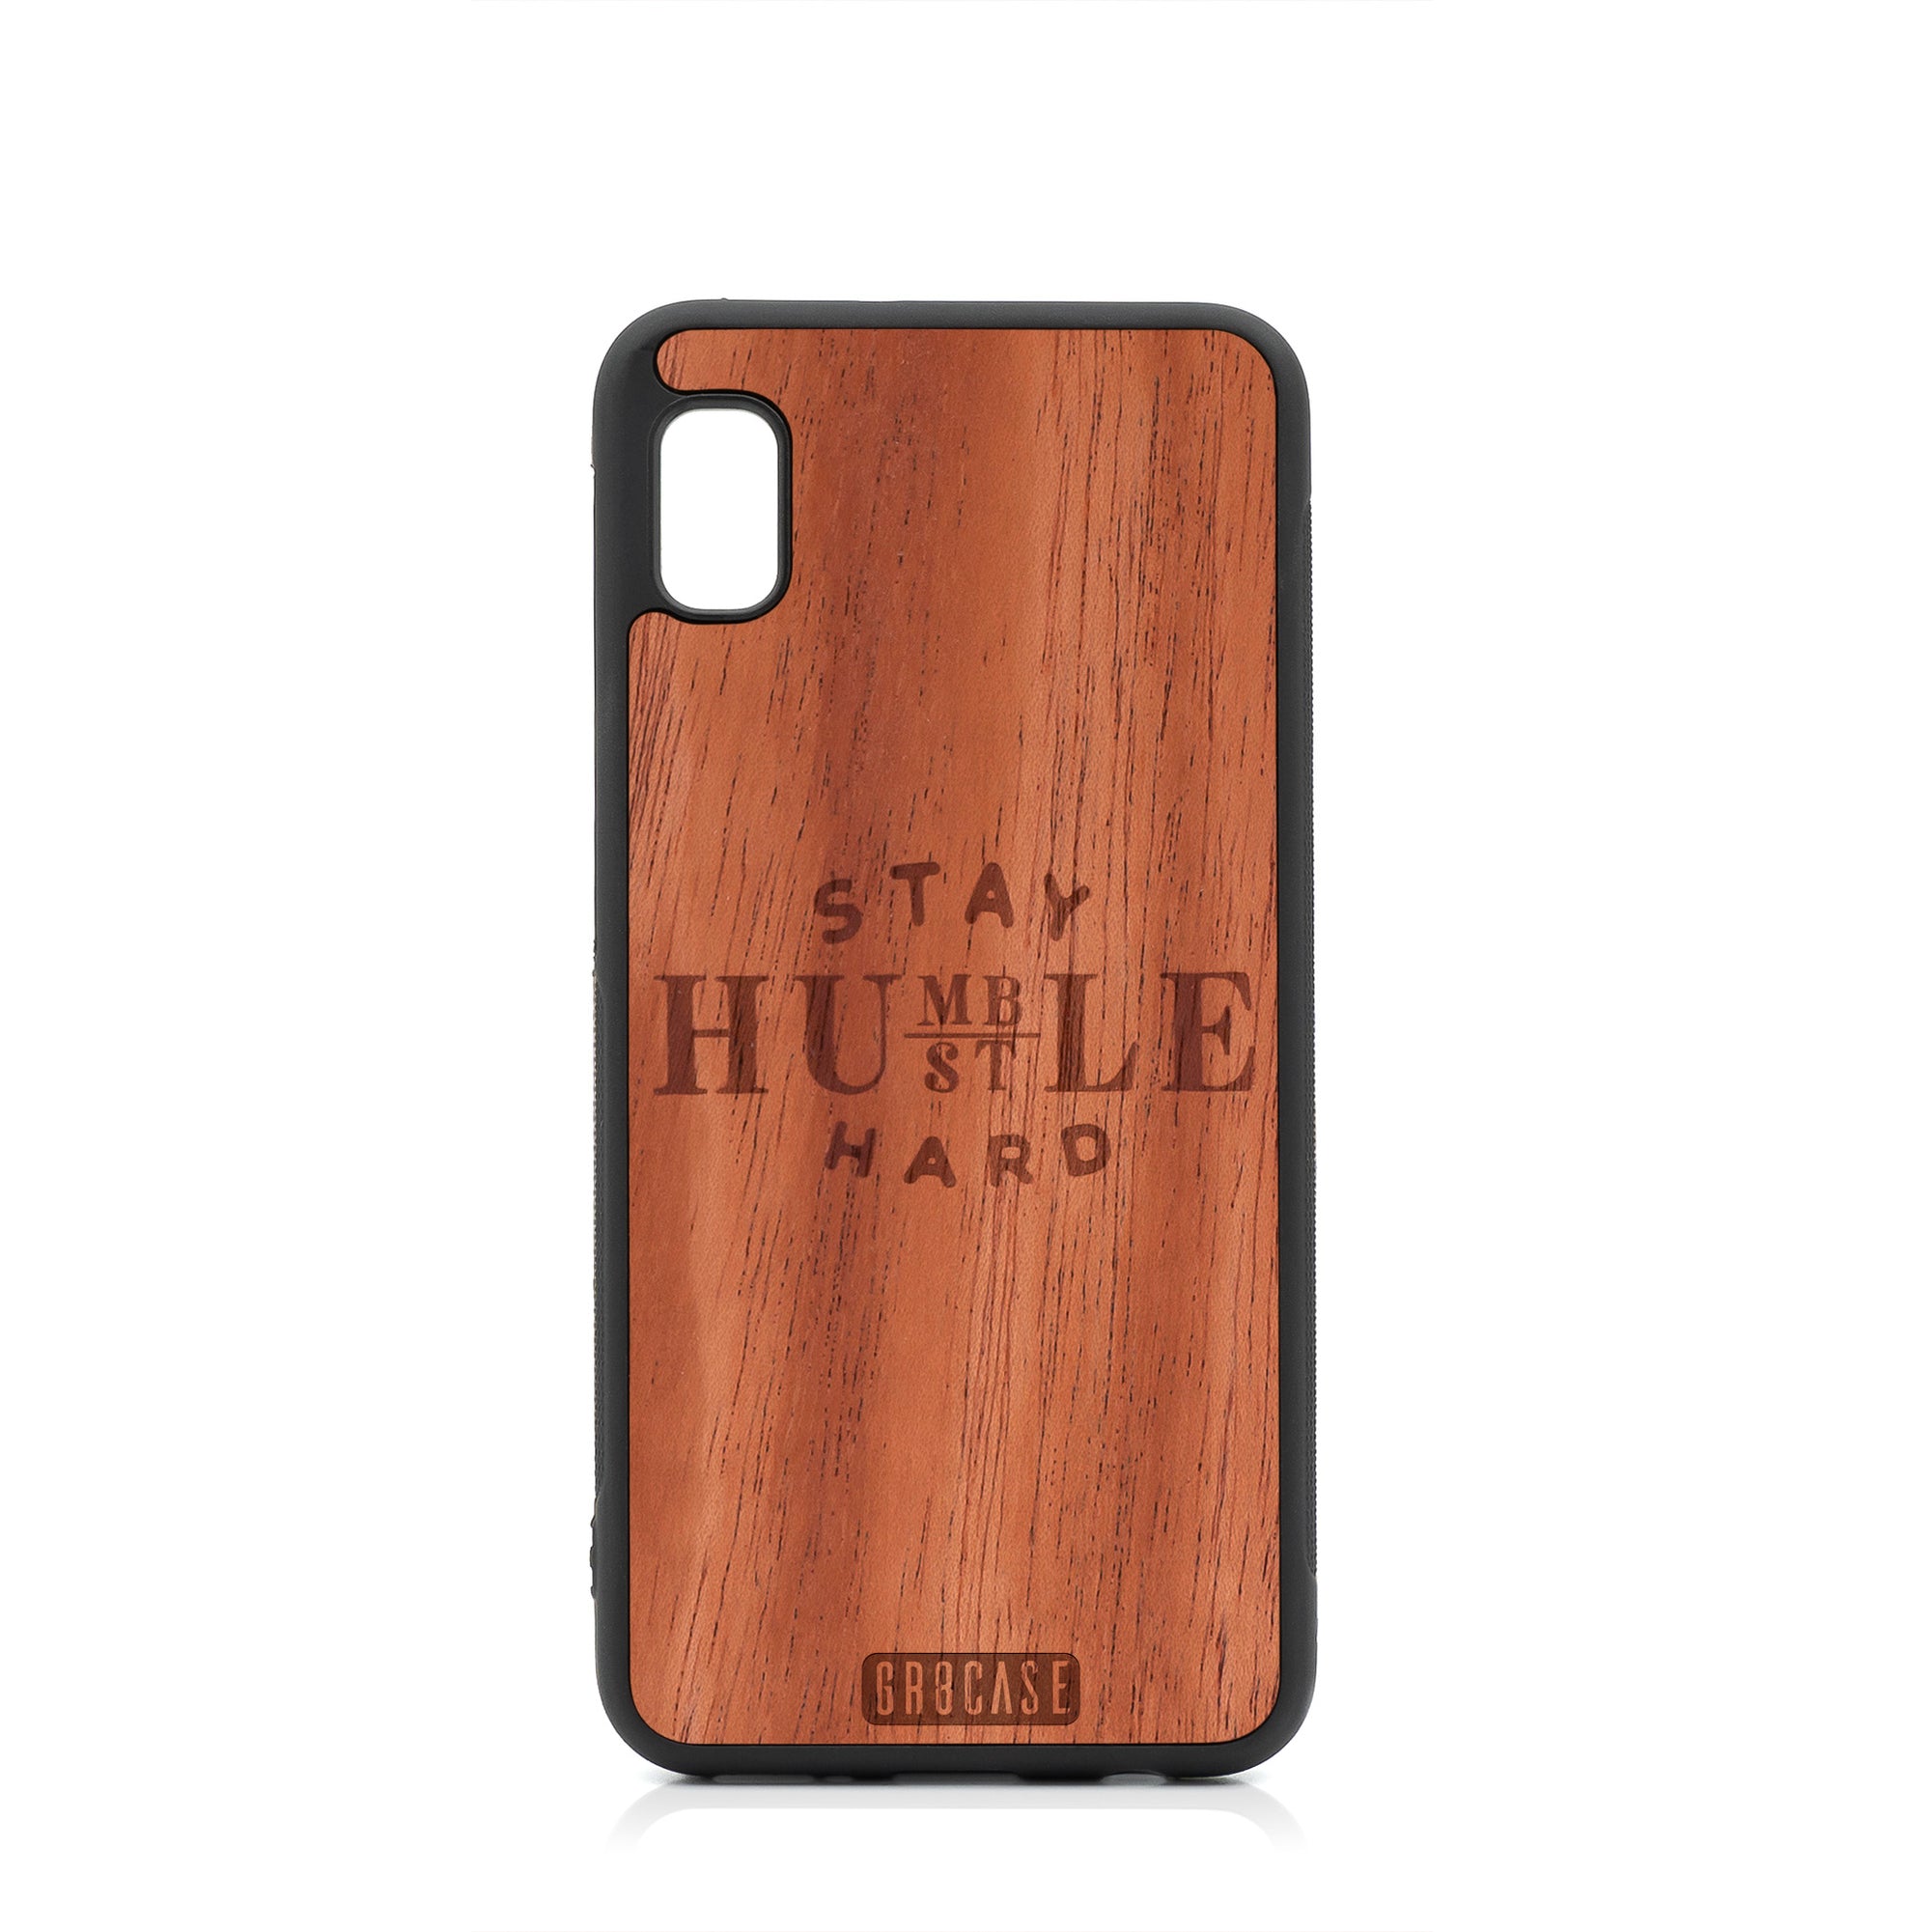 Stay Humble Hustle Hard Design Wood Case For Samsung Galaxy A10E by GR8CASE